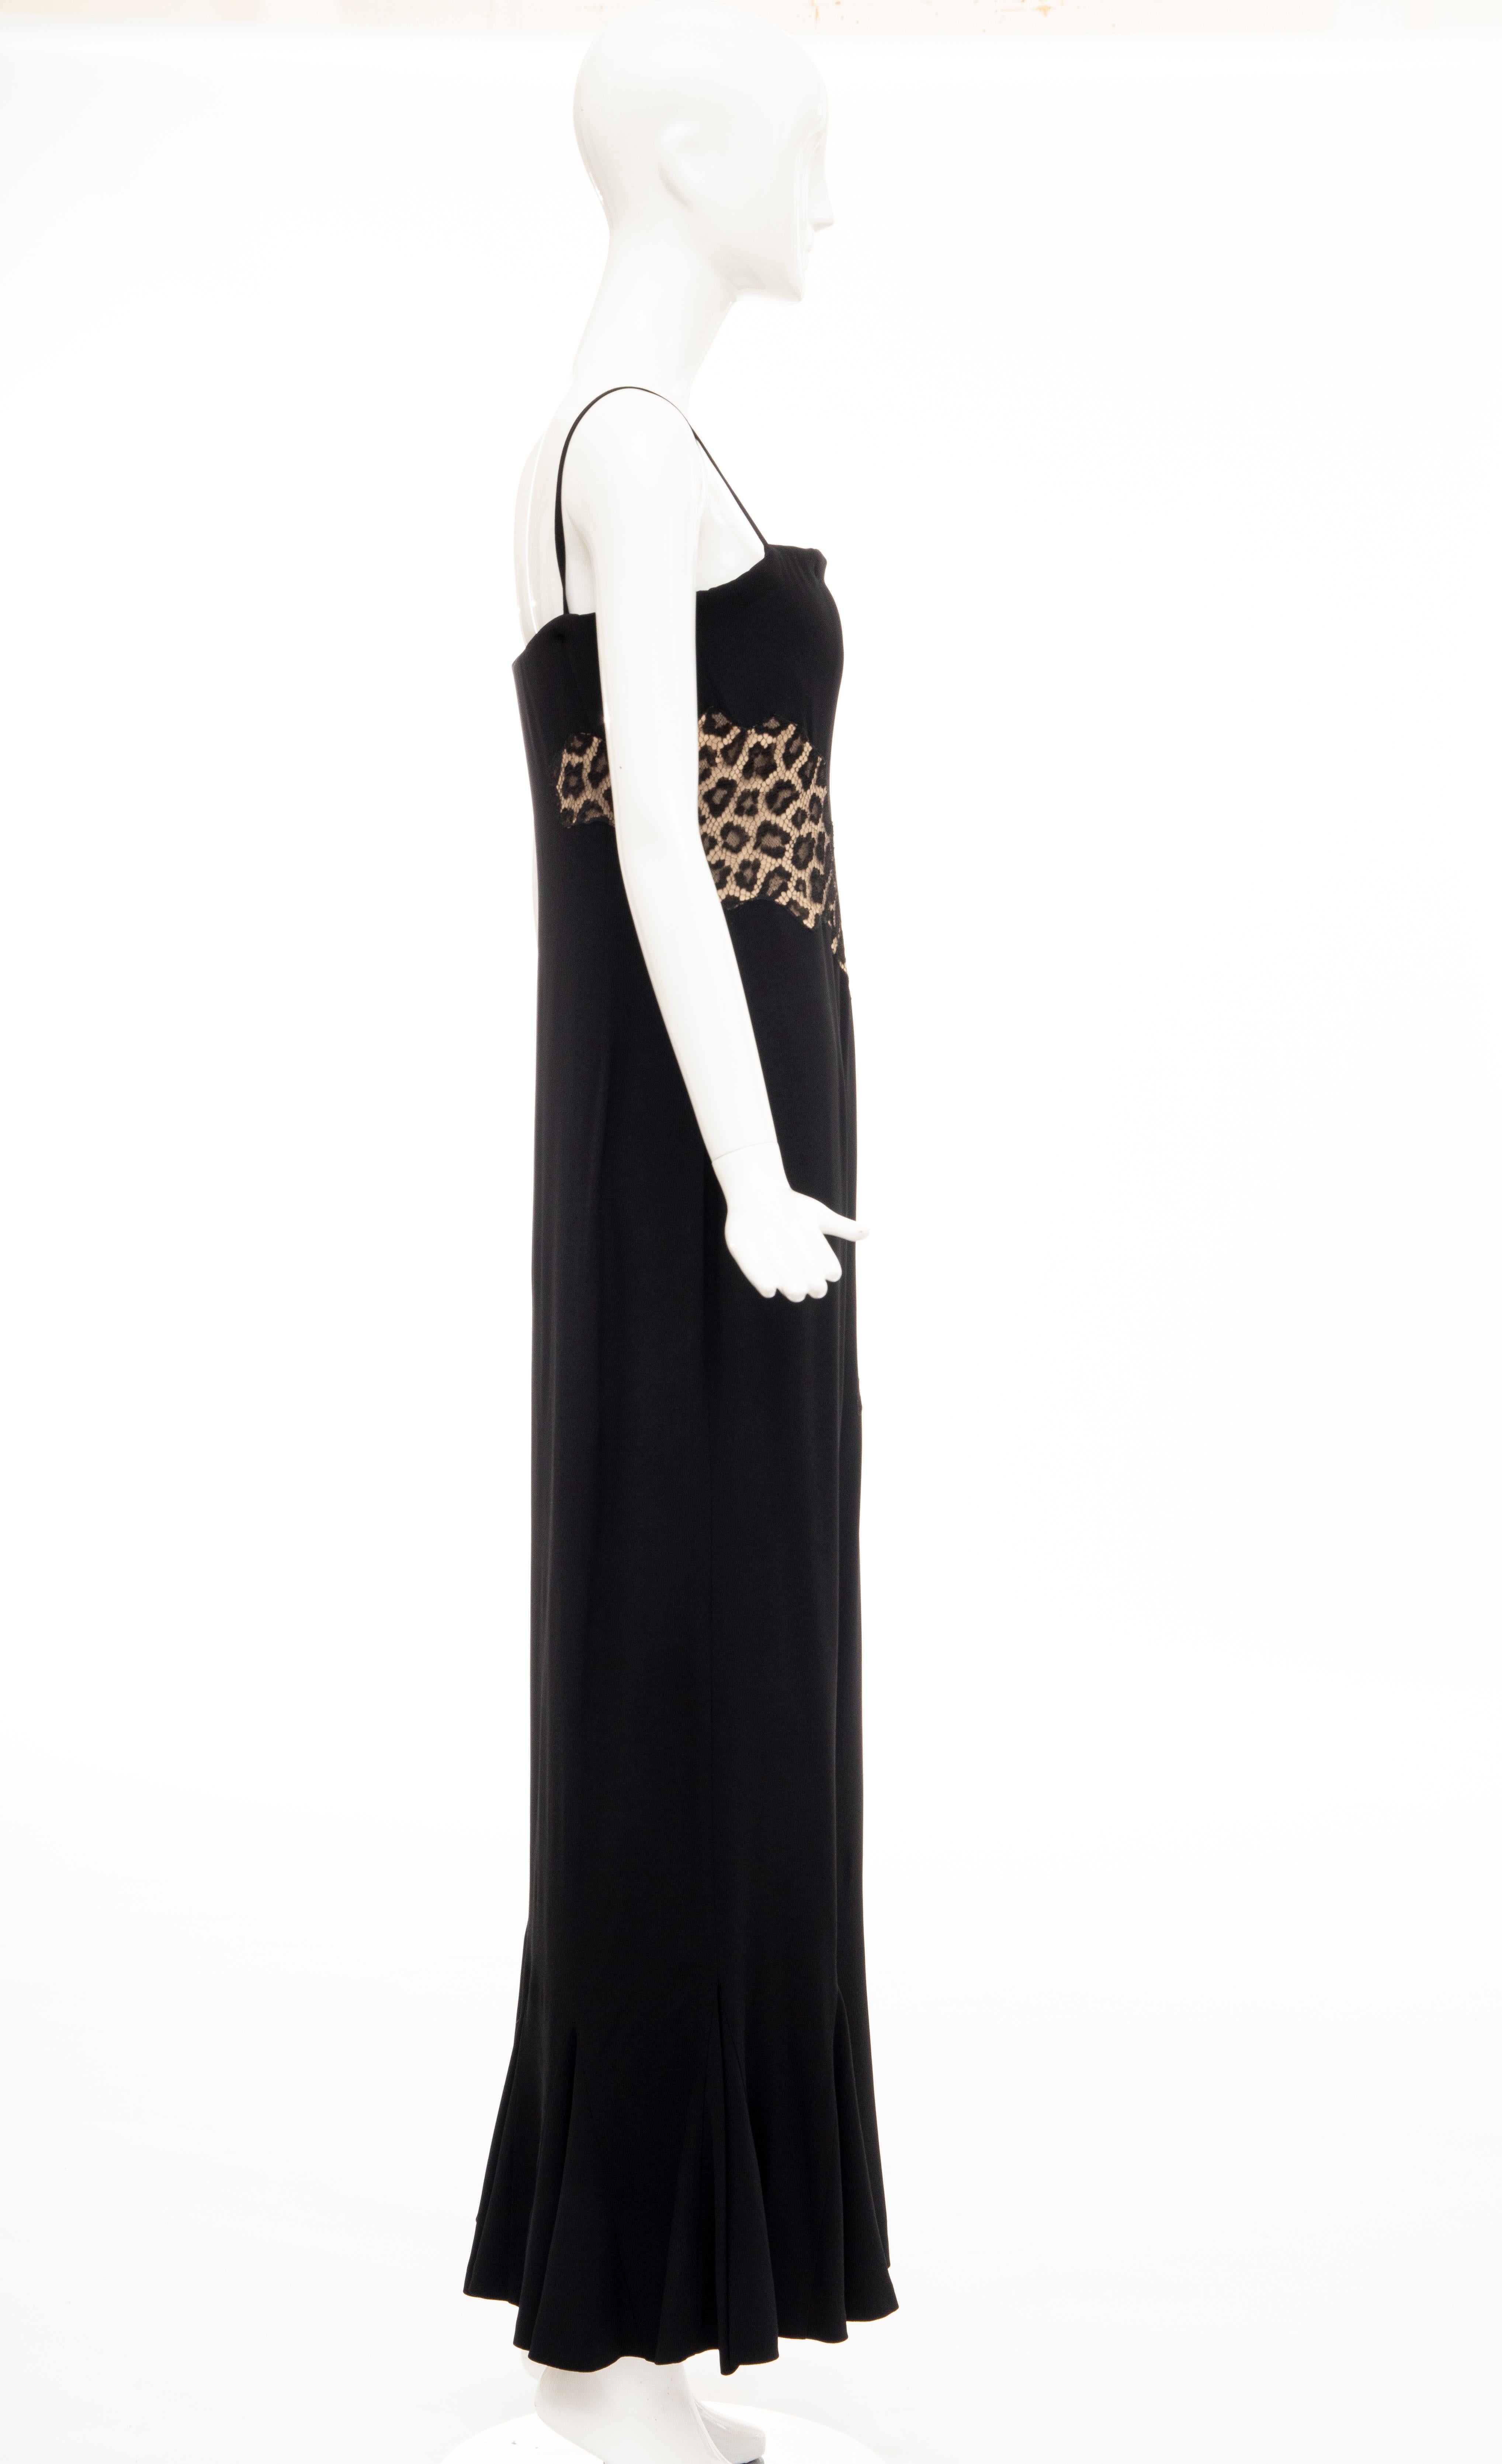 Alexander McQueen Givenchy Couture Black Leopard Lace Evening Dress, Fall 1997 In Excellent Condition For Sale In Cincinnati, OH